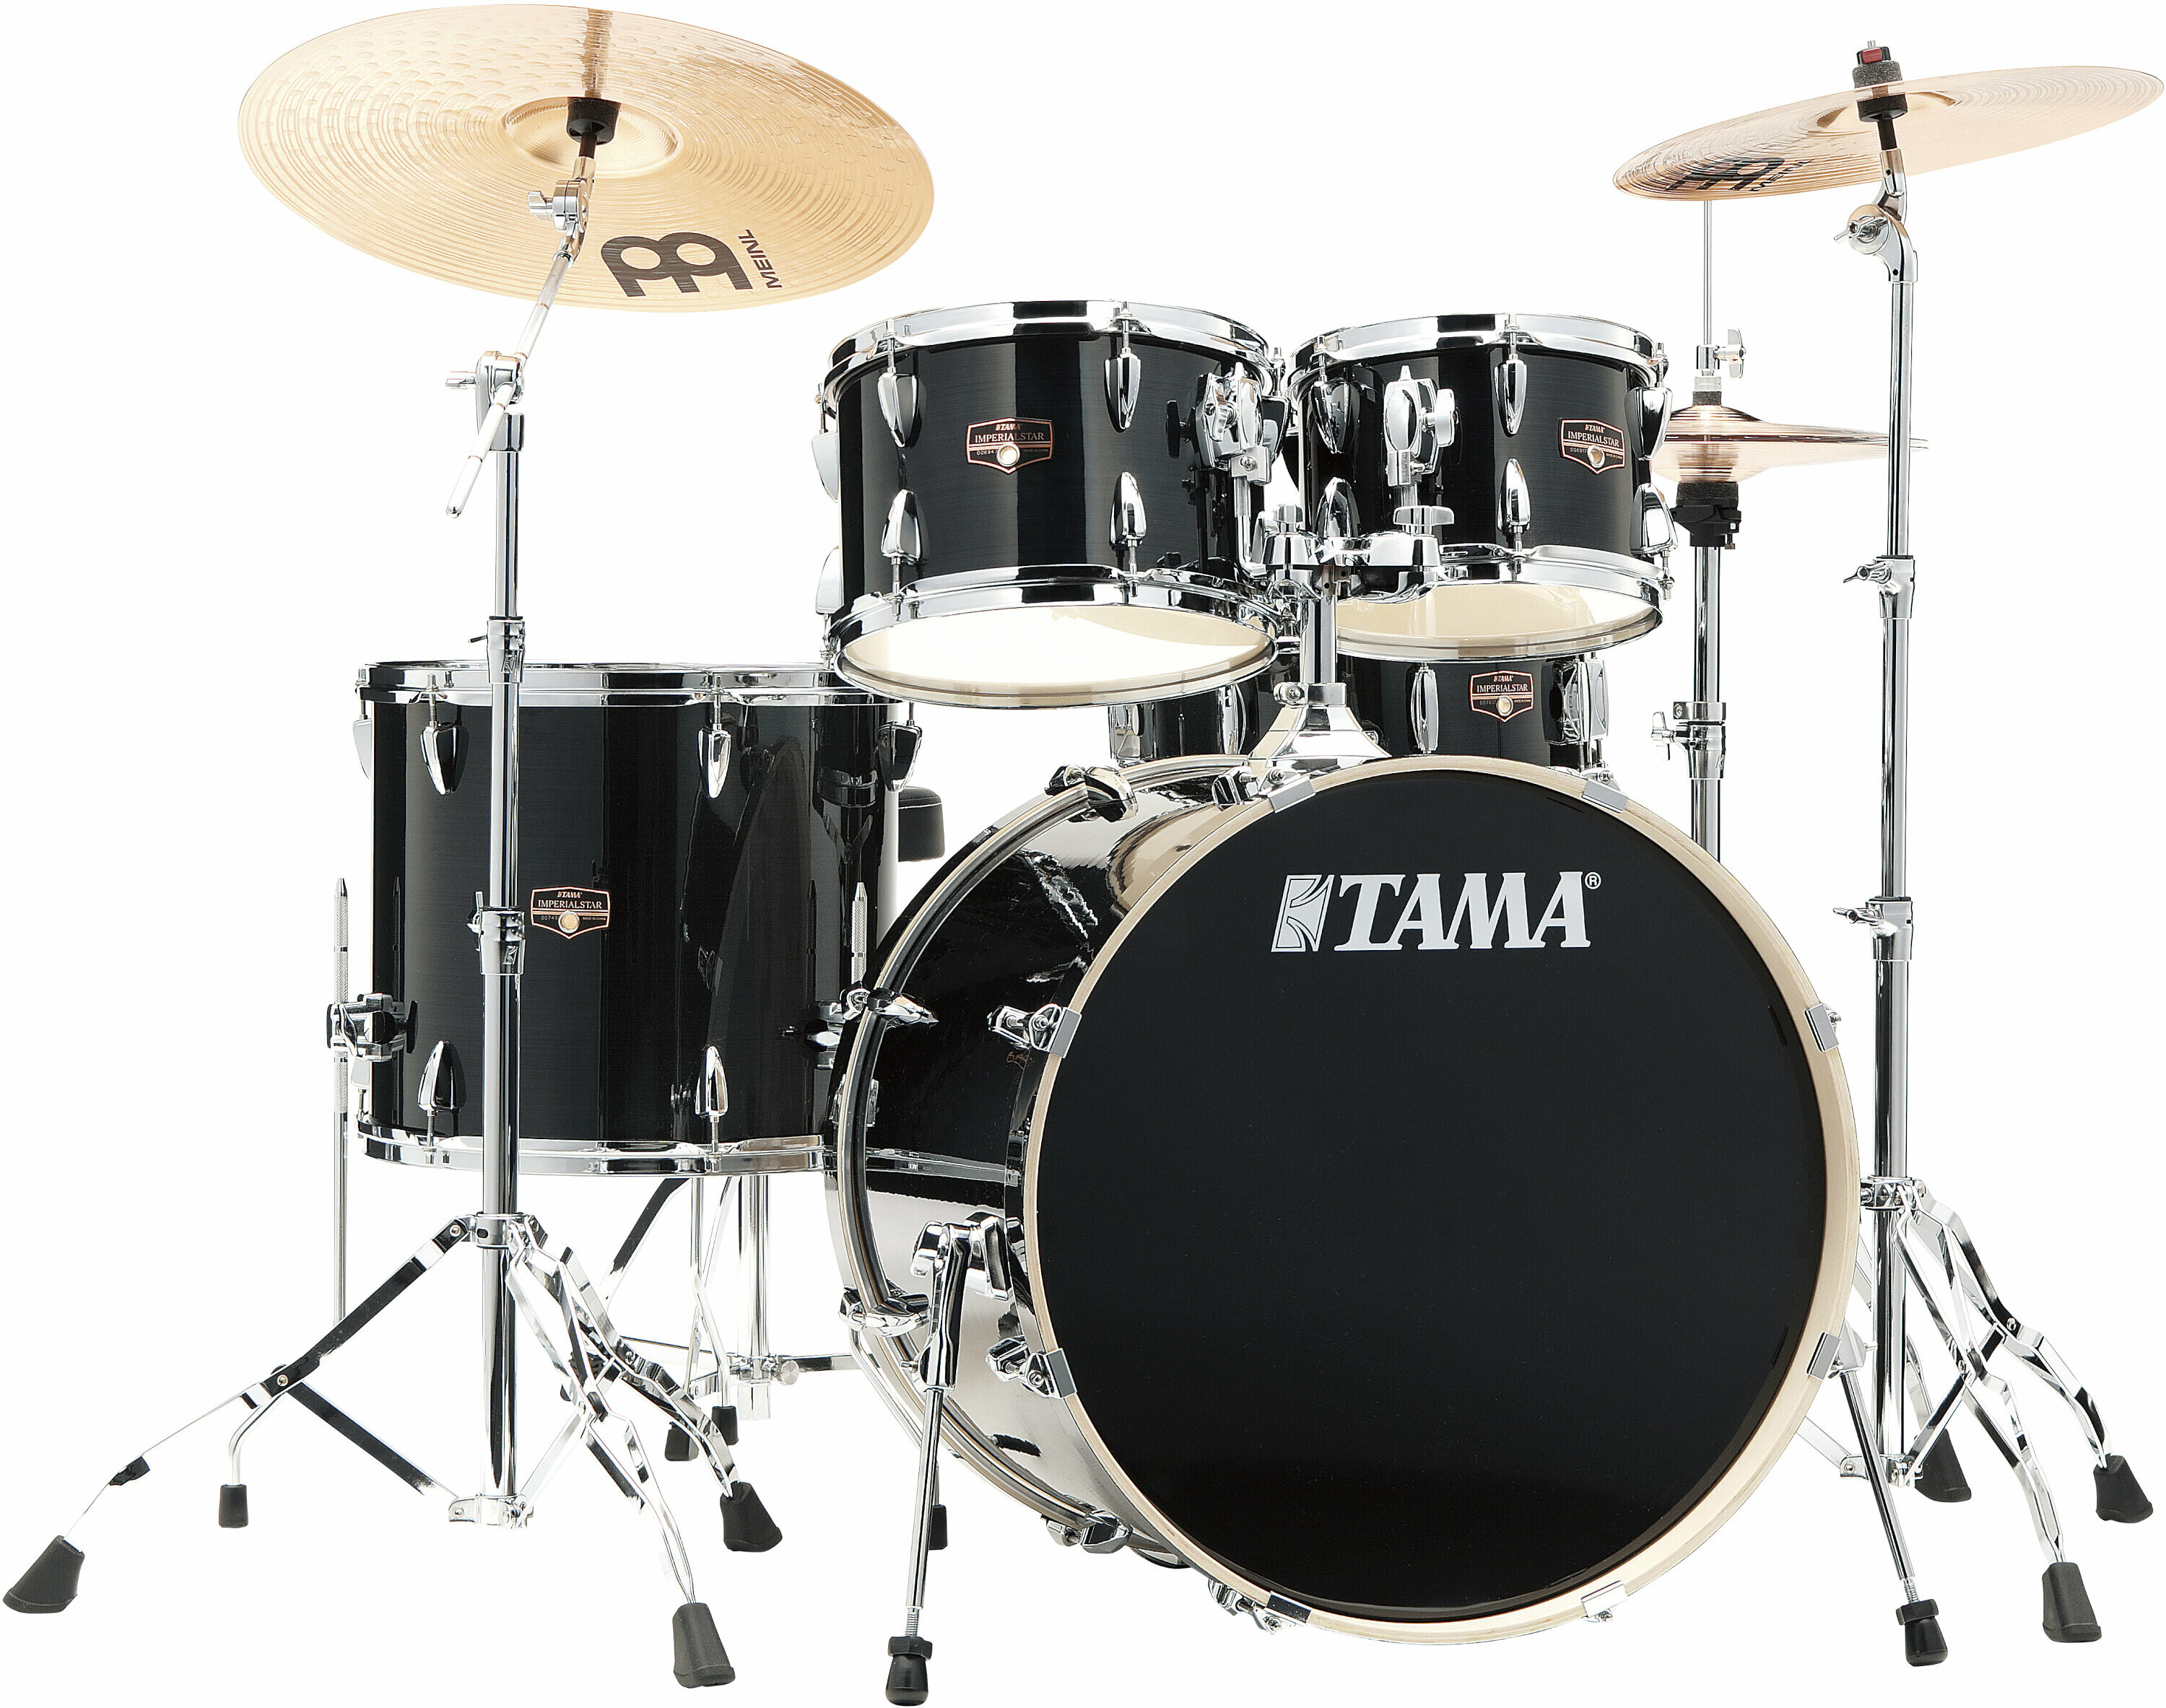 Tama Imperialstar Cl 5 Futs Shell Kit + Meinl Cymbal - Hairline Black - Standard drum kit - Main picture